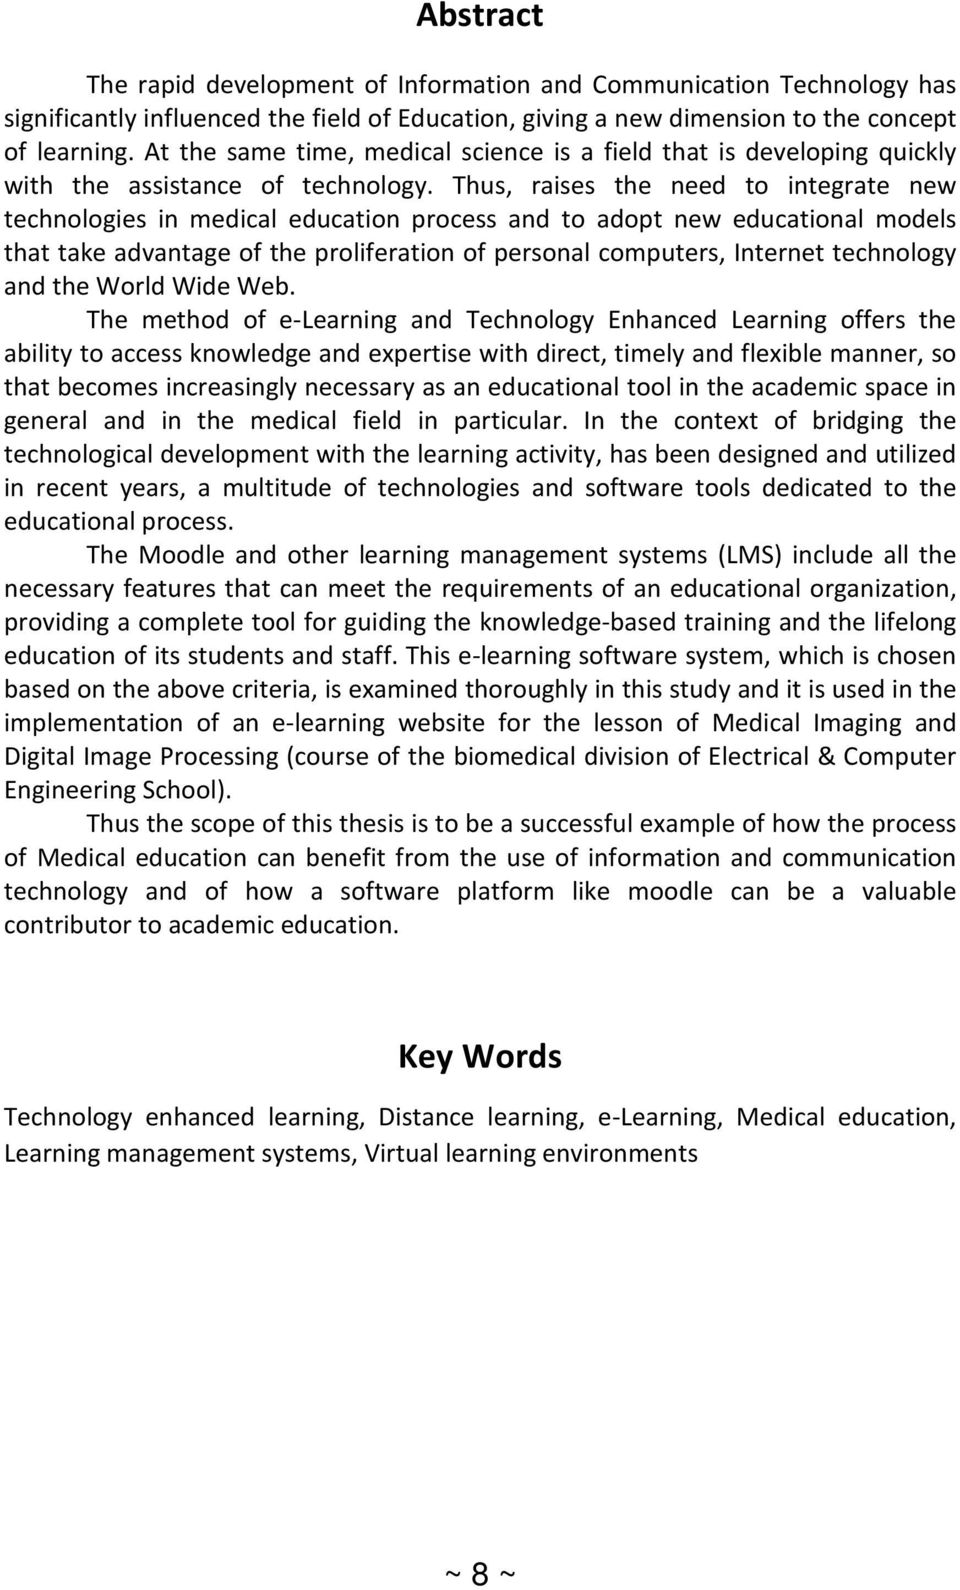 Thus, raises the need to integrate new technologies in medical education process and to adopt new educational models that take advantage of the proliferation of personal computers, Internet